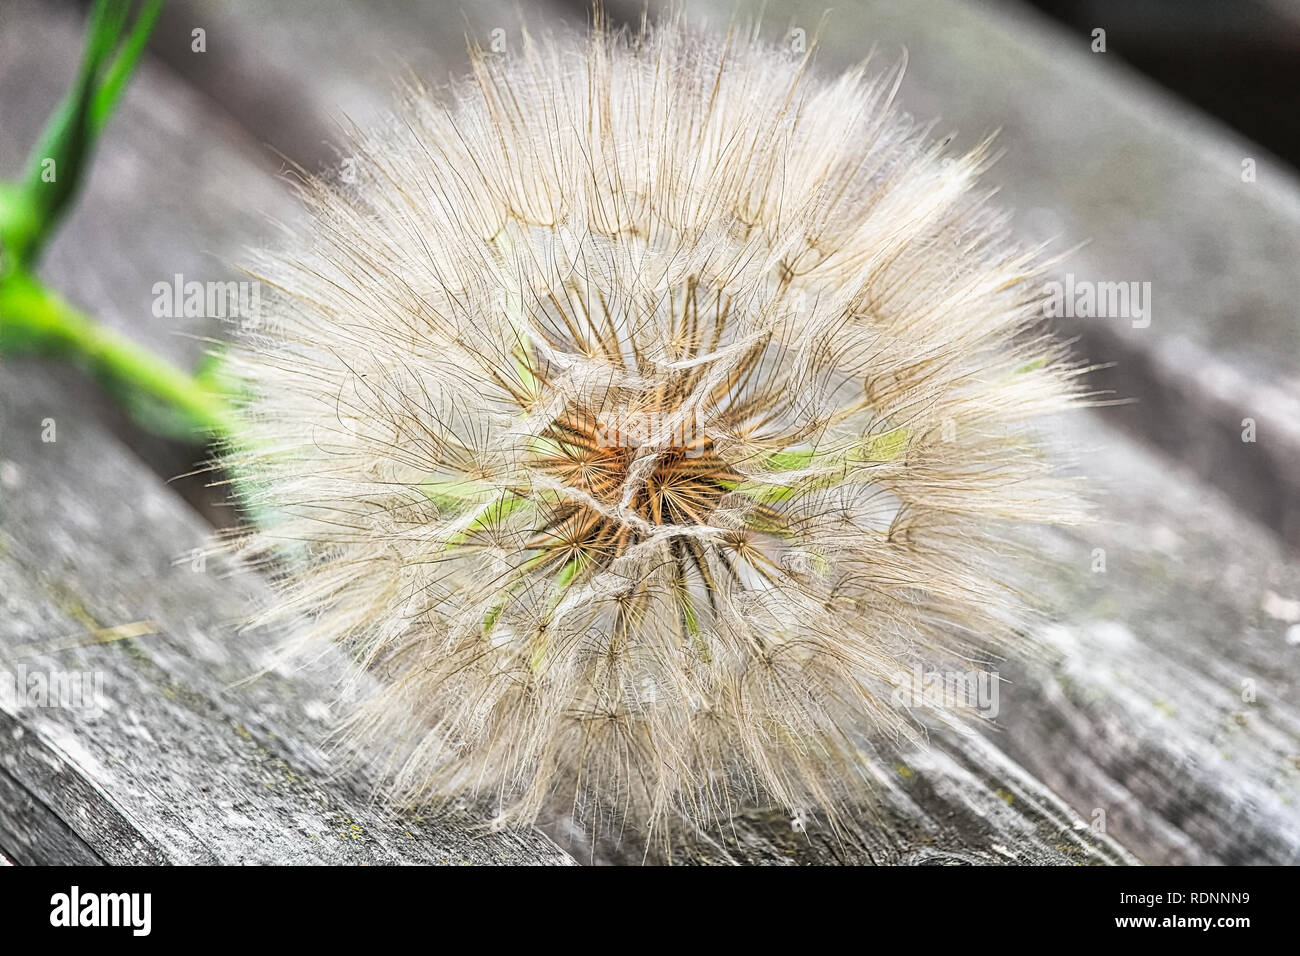 The seed head of a large weed - tragopogon. Stock Photo